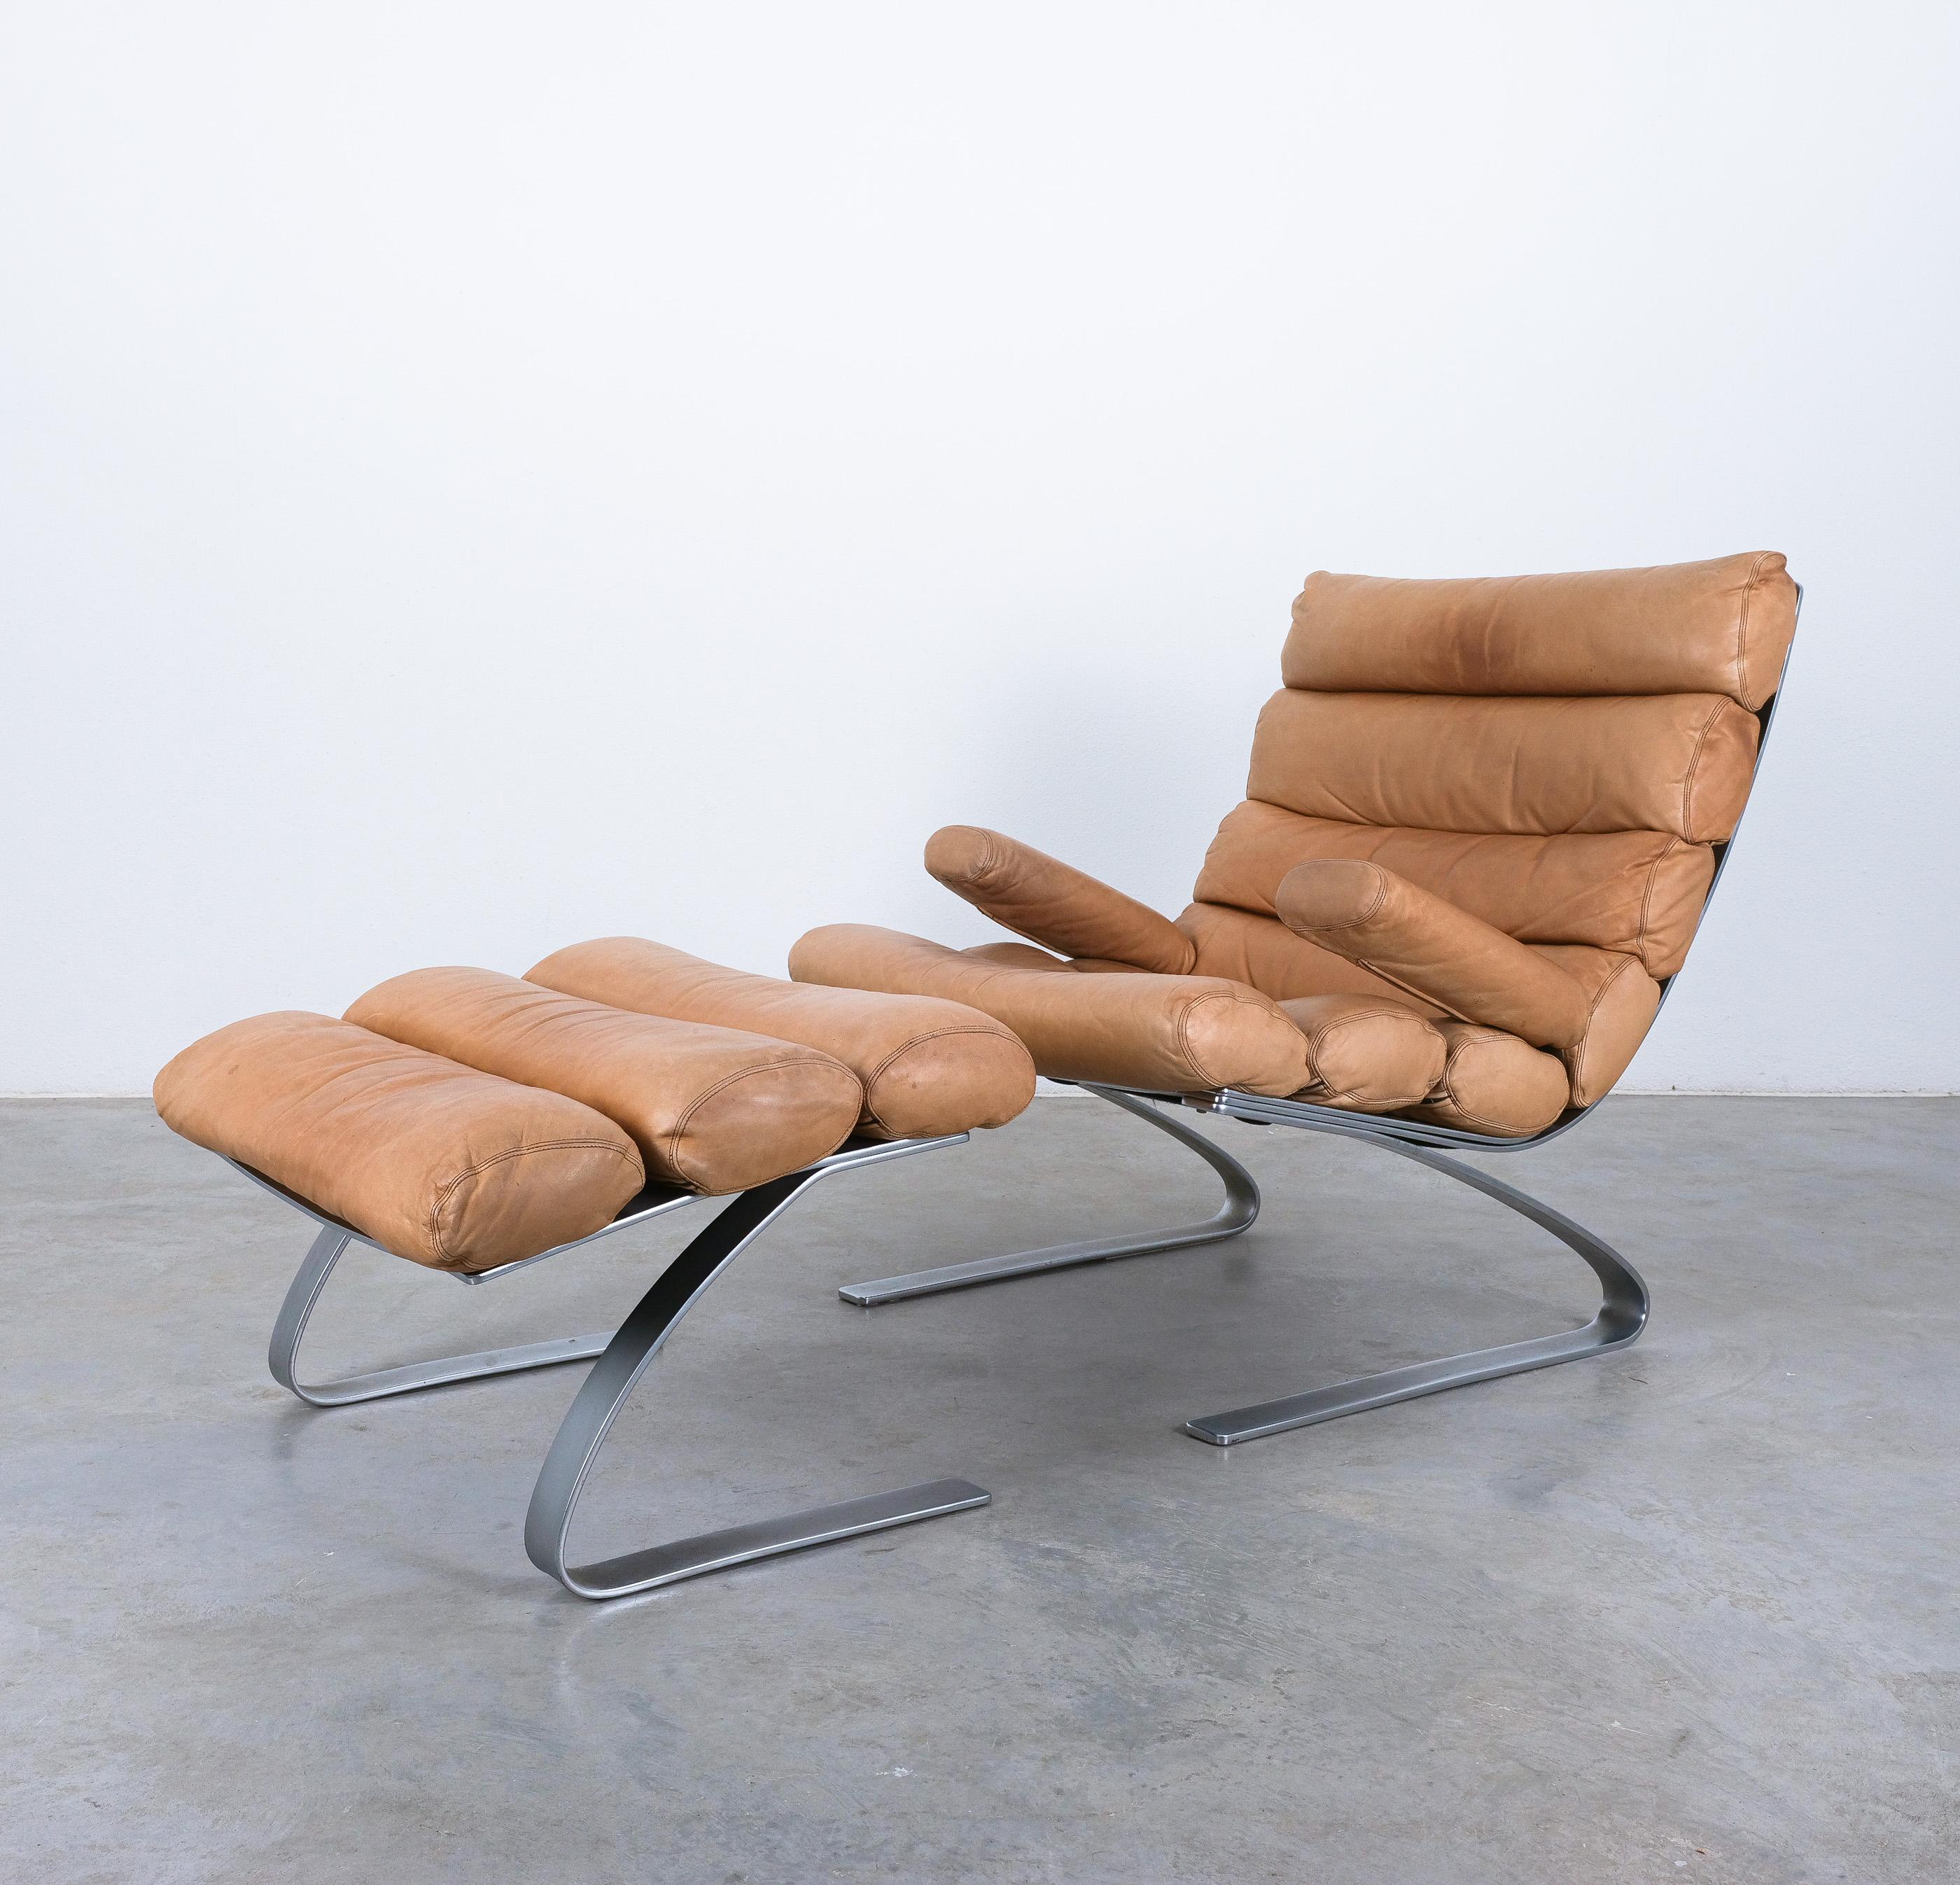 First Edition 'Sinus' lounge armchair by Reinhold Adolf & Hans-Jürgen Schröpfer for Cor, Germany 1976

Original and rare Sinus chair + ottoman with its original smooth and unharmed aniline leather. The Sinus chair received its name from the formal